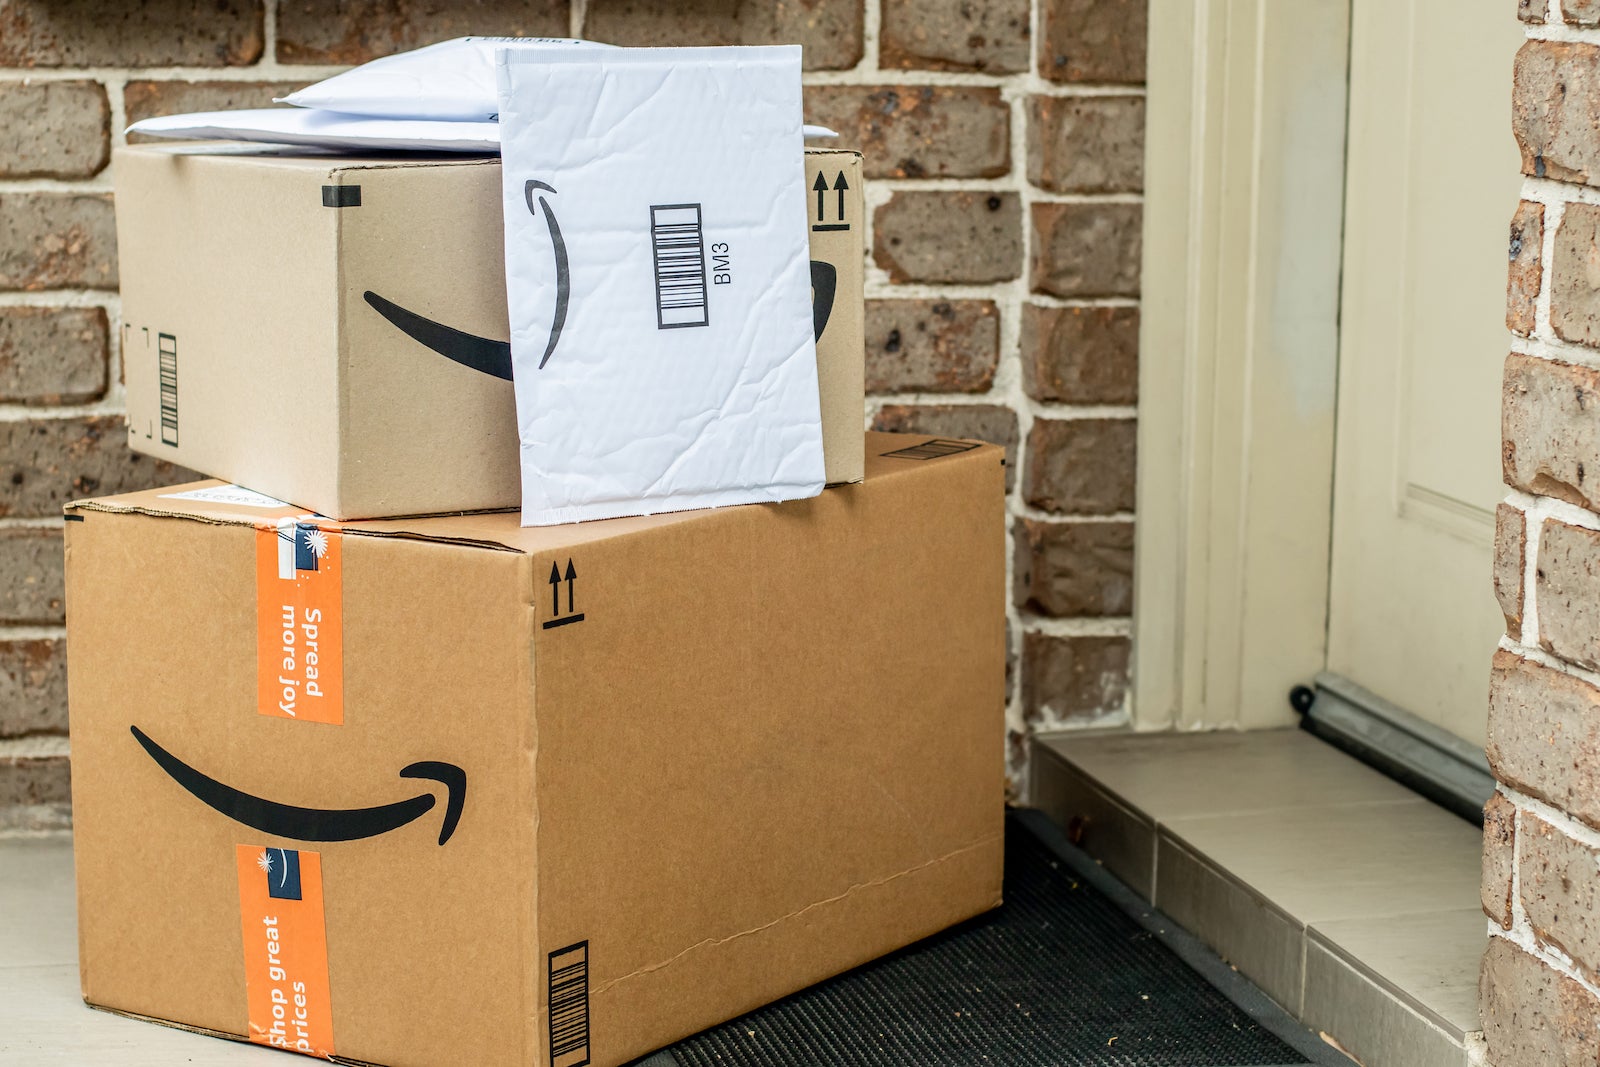 Amazon packages on a residential doorstep